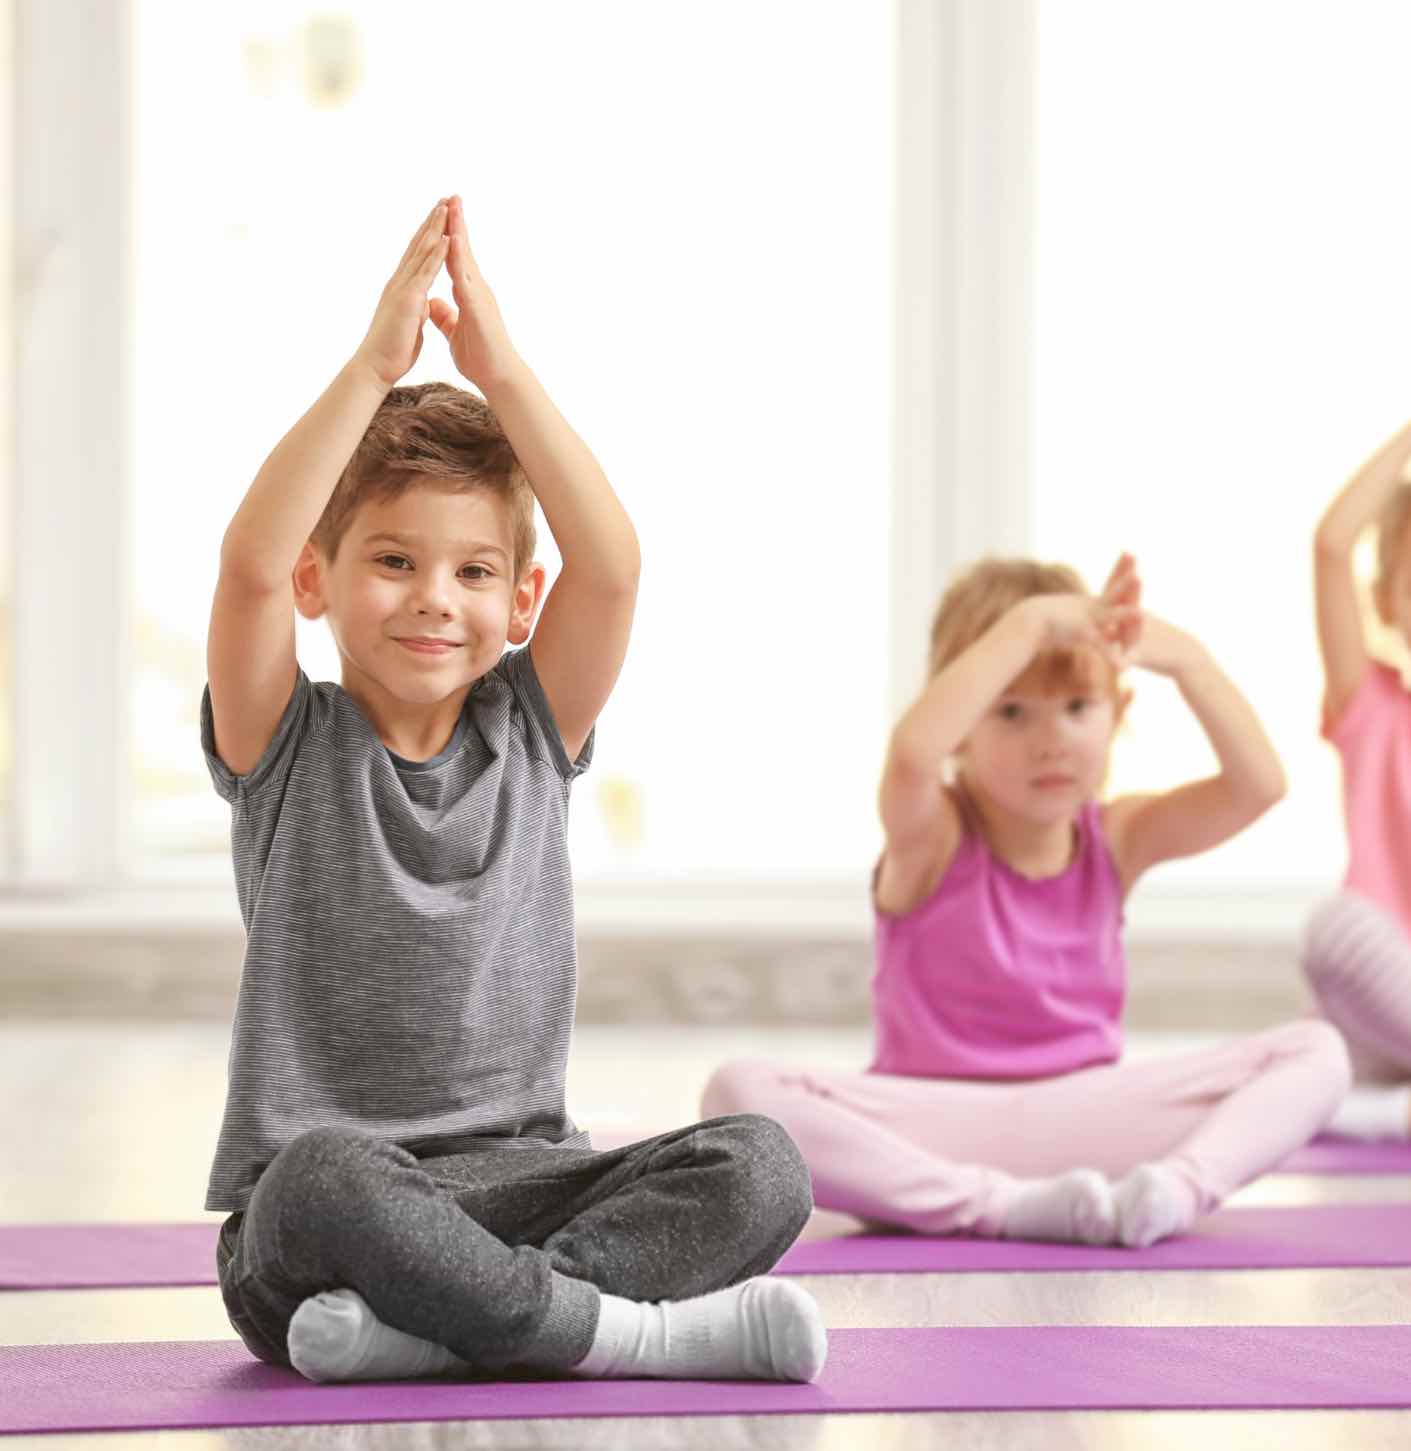 These kids enjoy practicing mindfulness through yoga - learn more tips with Romp n' Roll Wethersfield!